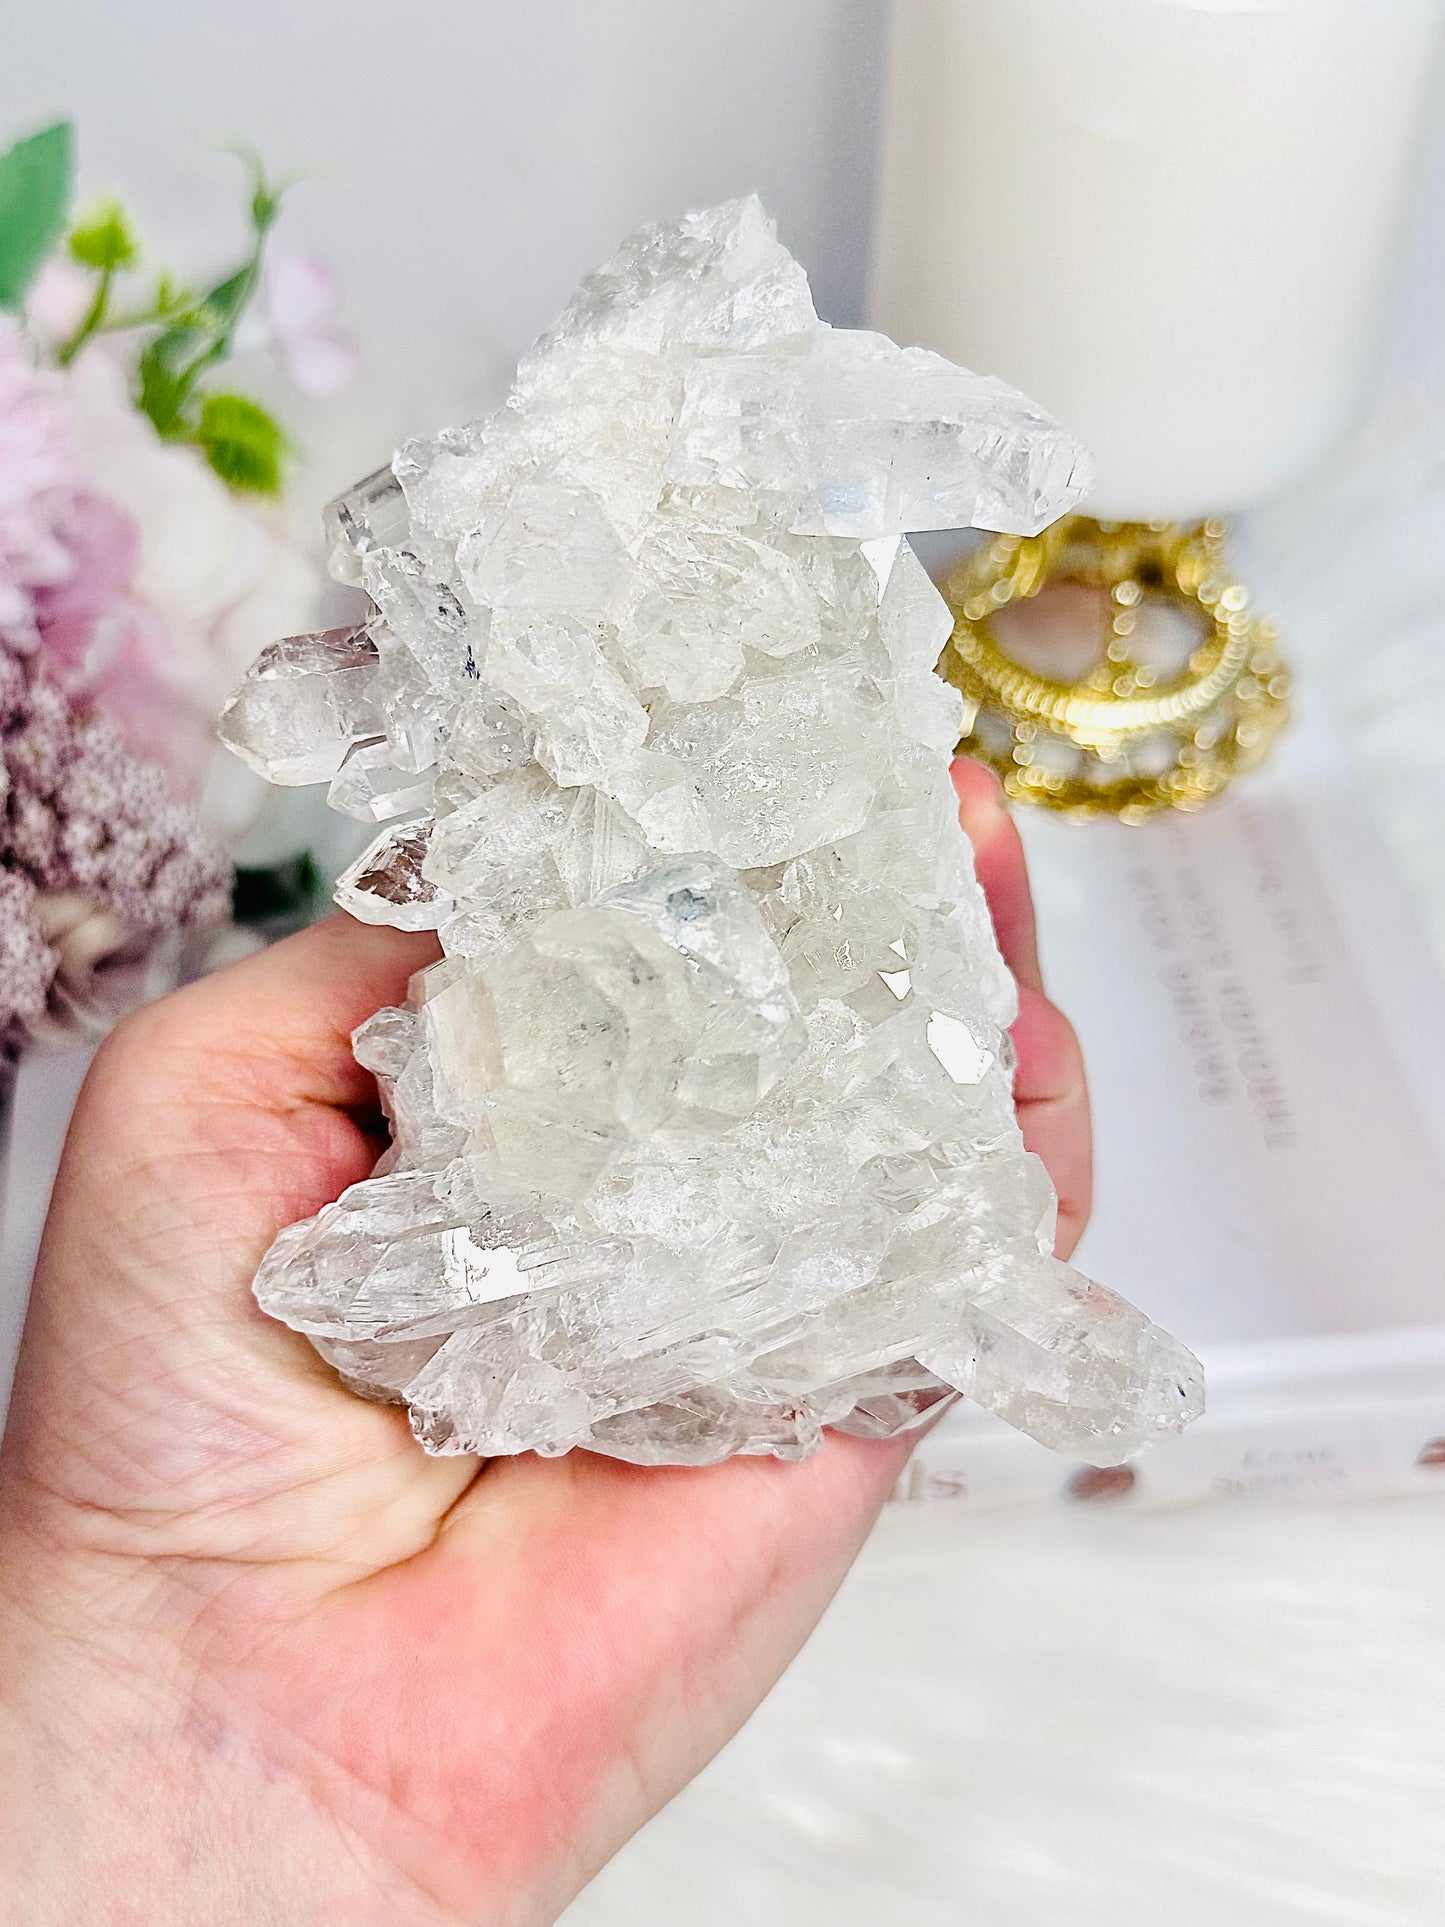 Absolutely Stunning High Quality Clear Quartz Natural Cluster Specimen From Brazil 11.5cm 415grams